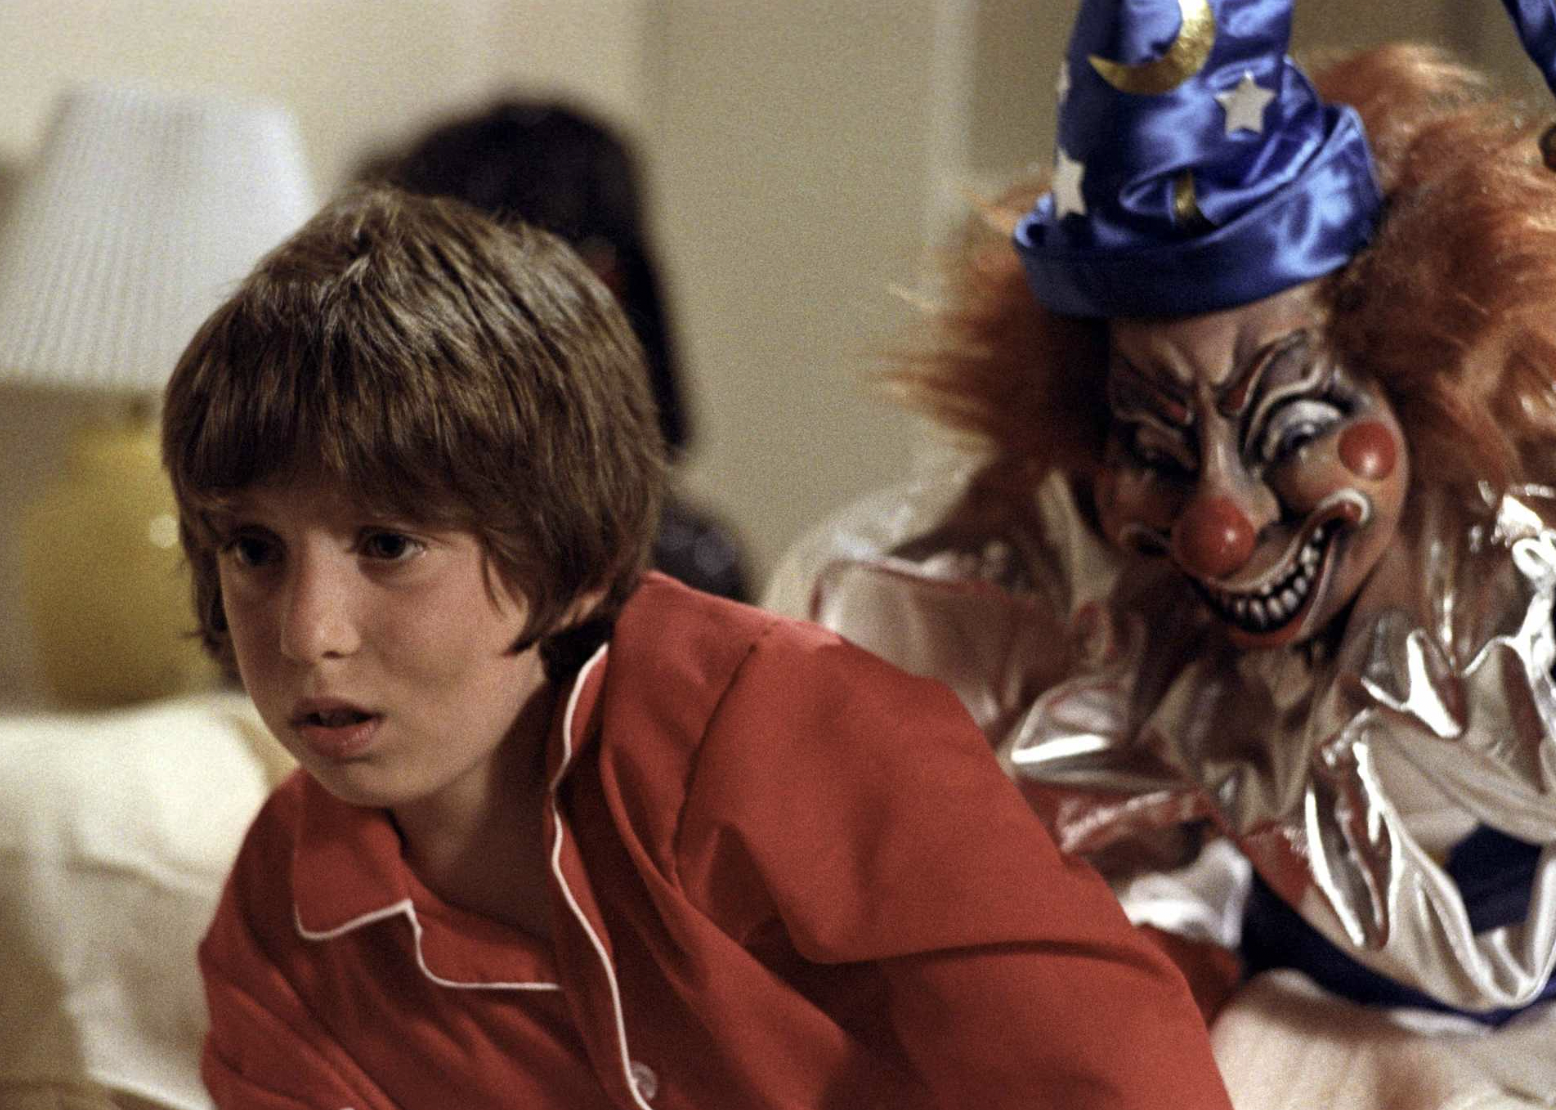 Oliver Robins in a scene from "Poltergeist"